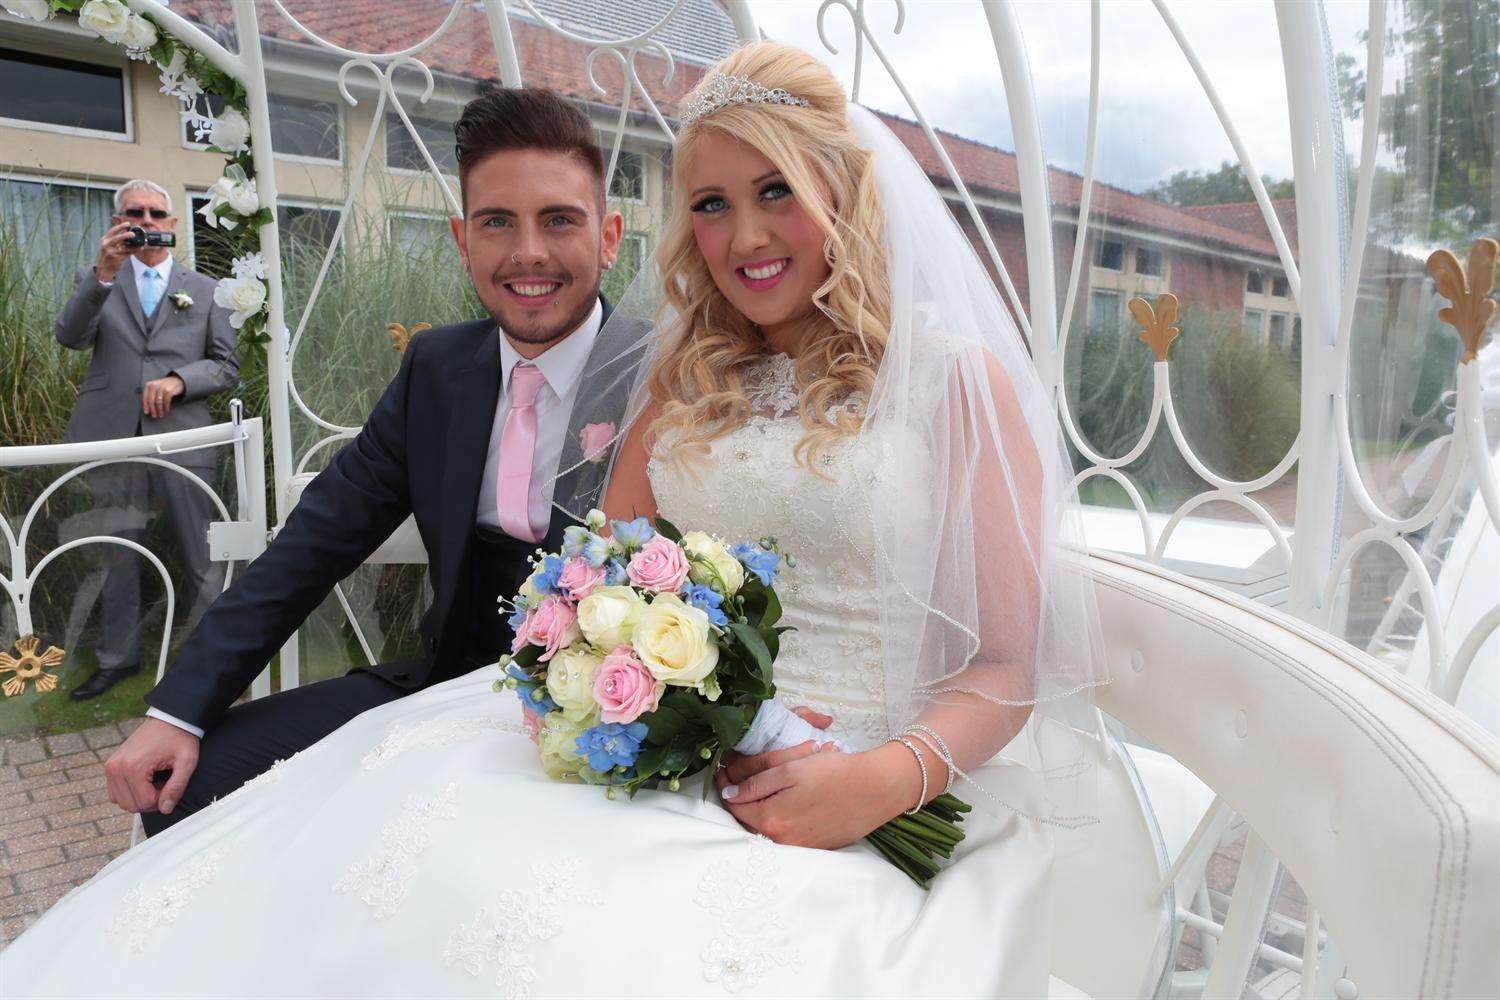 Fairytale themed wedding for Sophie-Rose Bance and Ashley Long